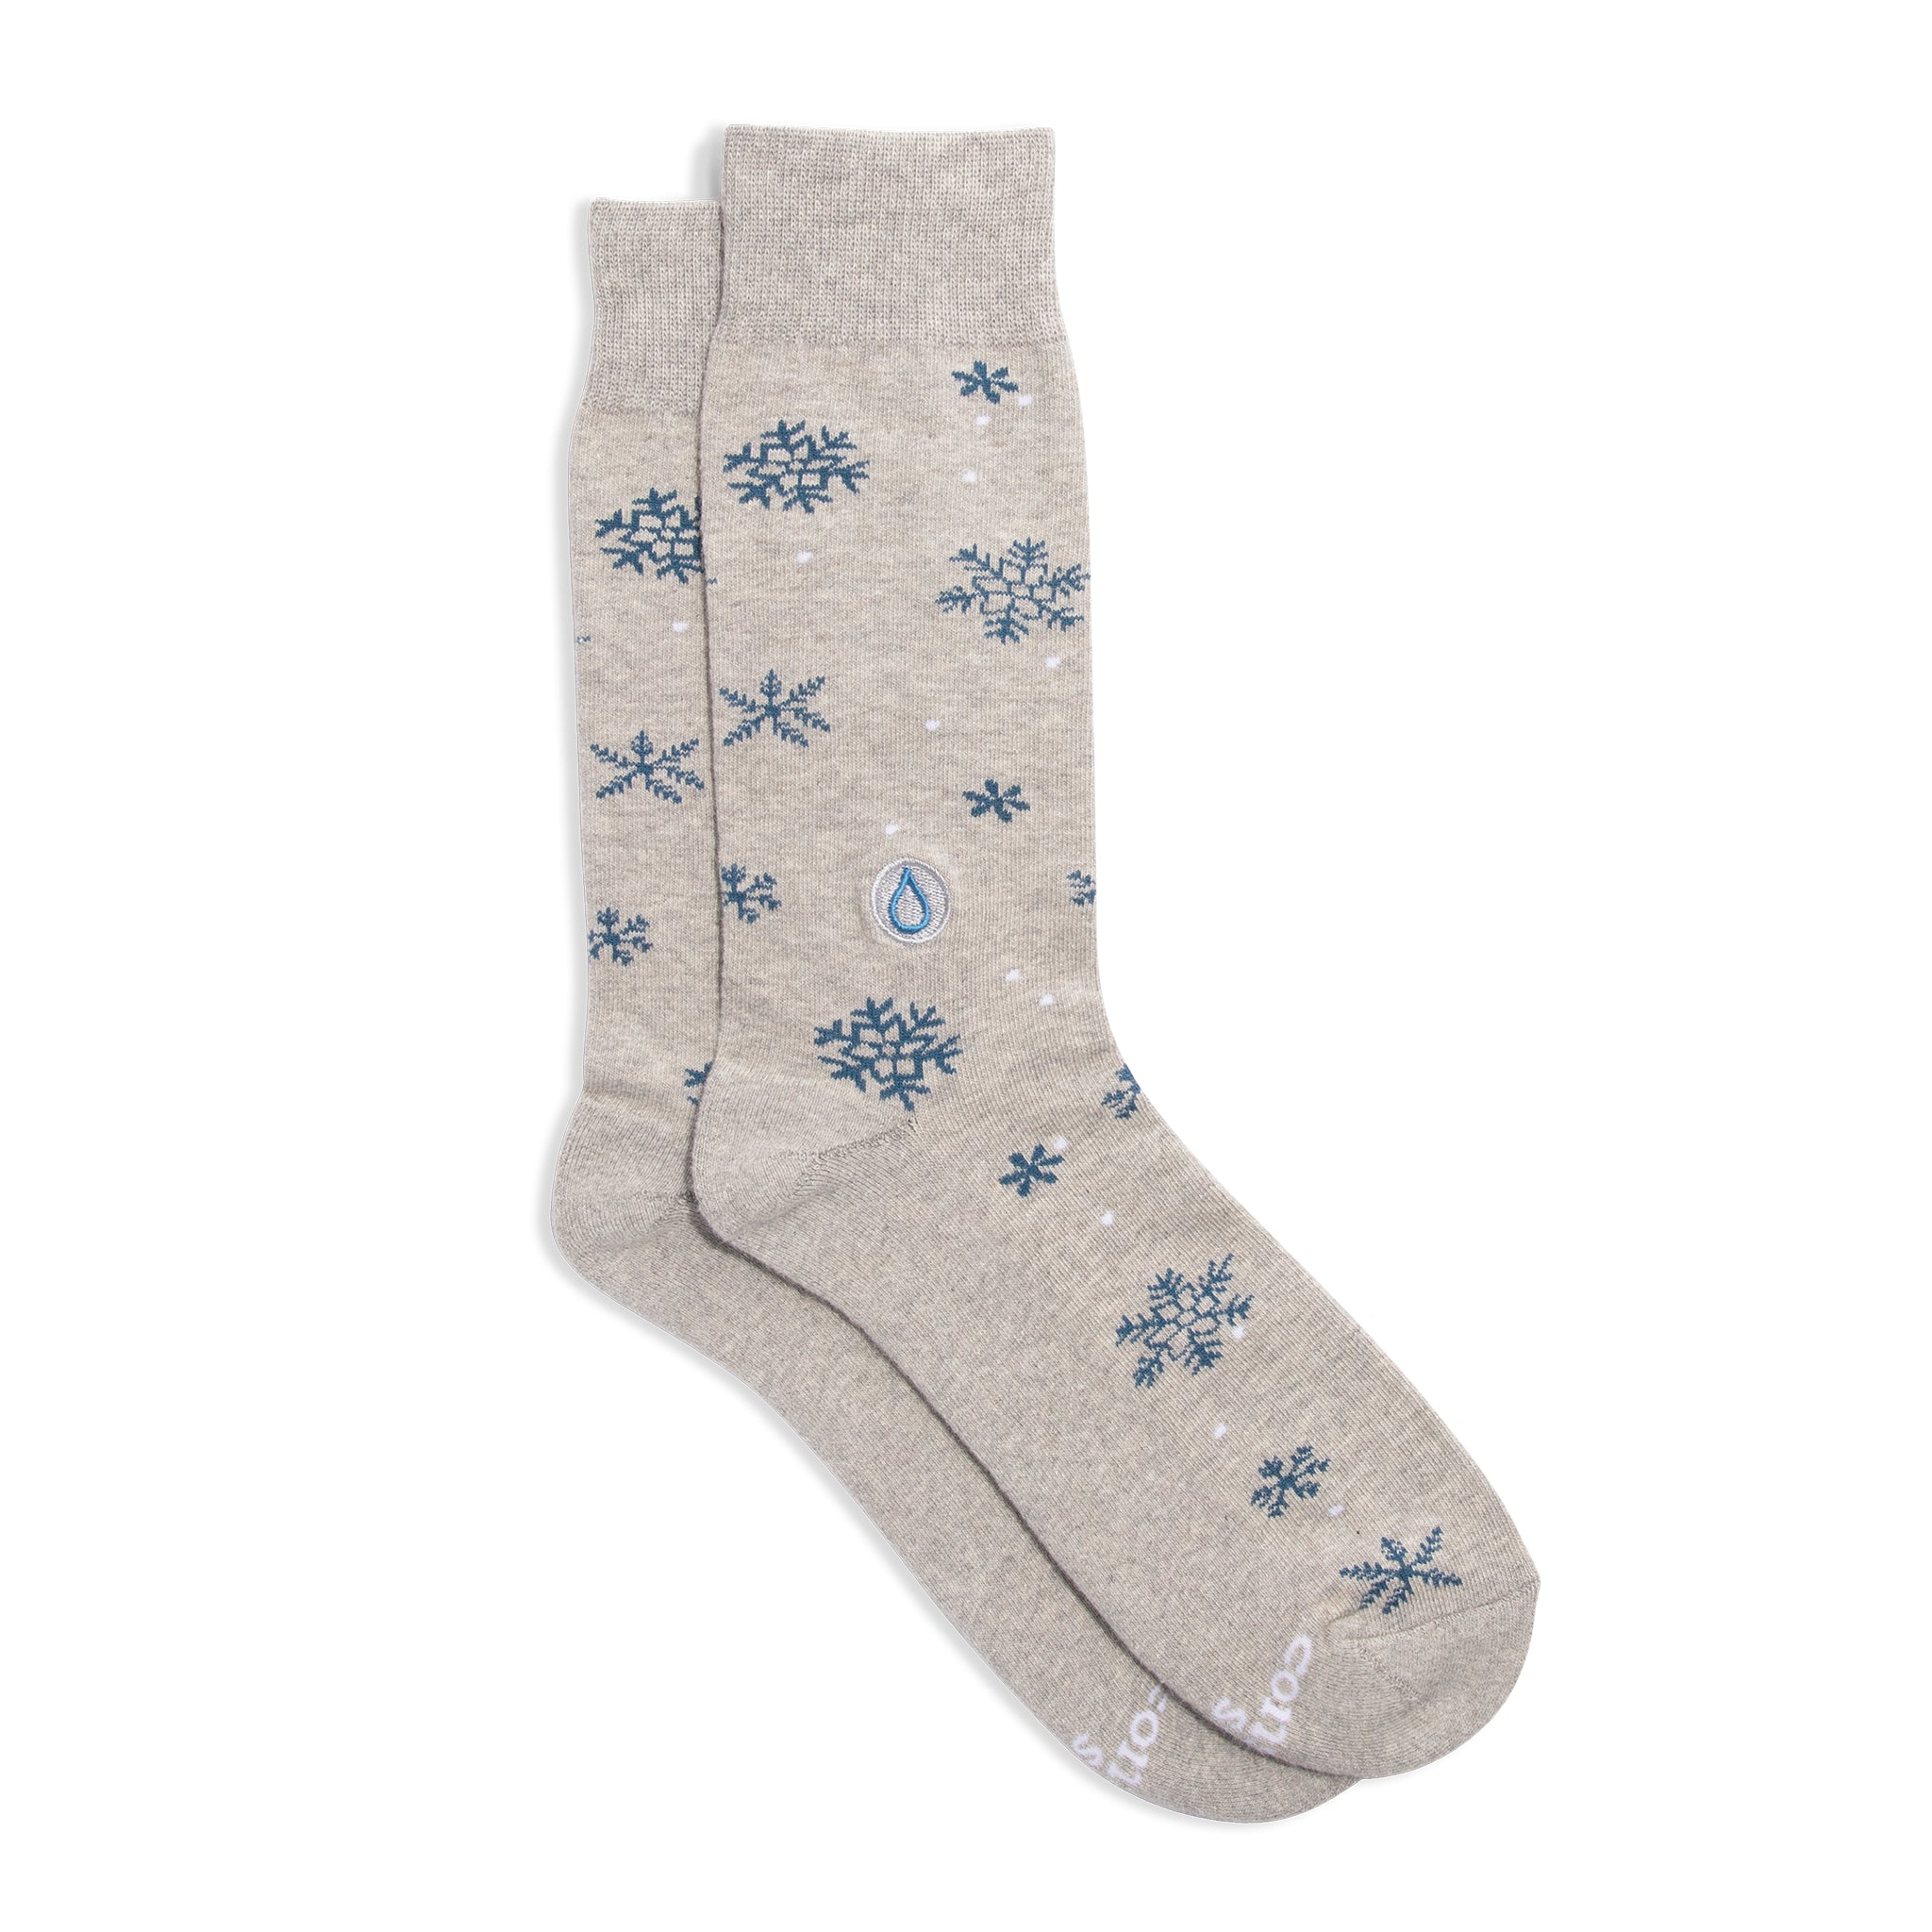 Conscious Step | Socks that Give Water | Support Water.org